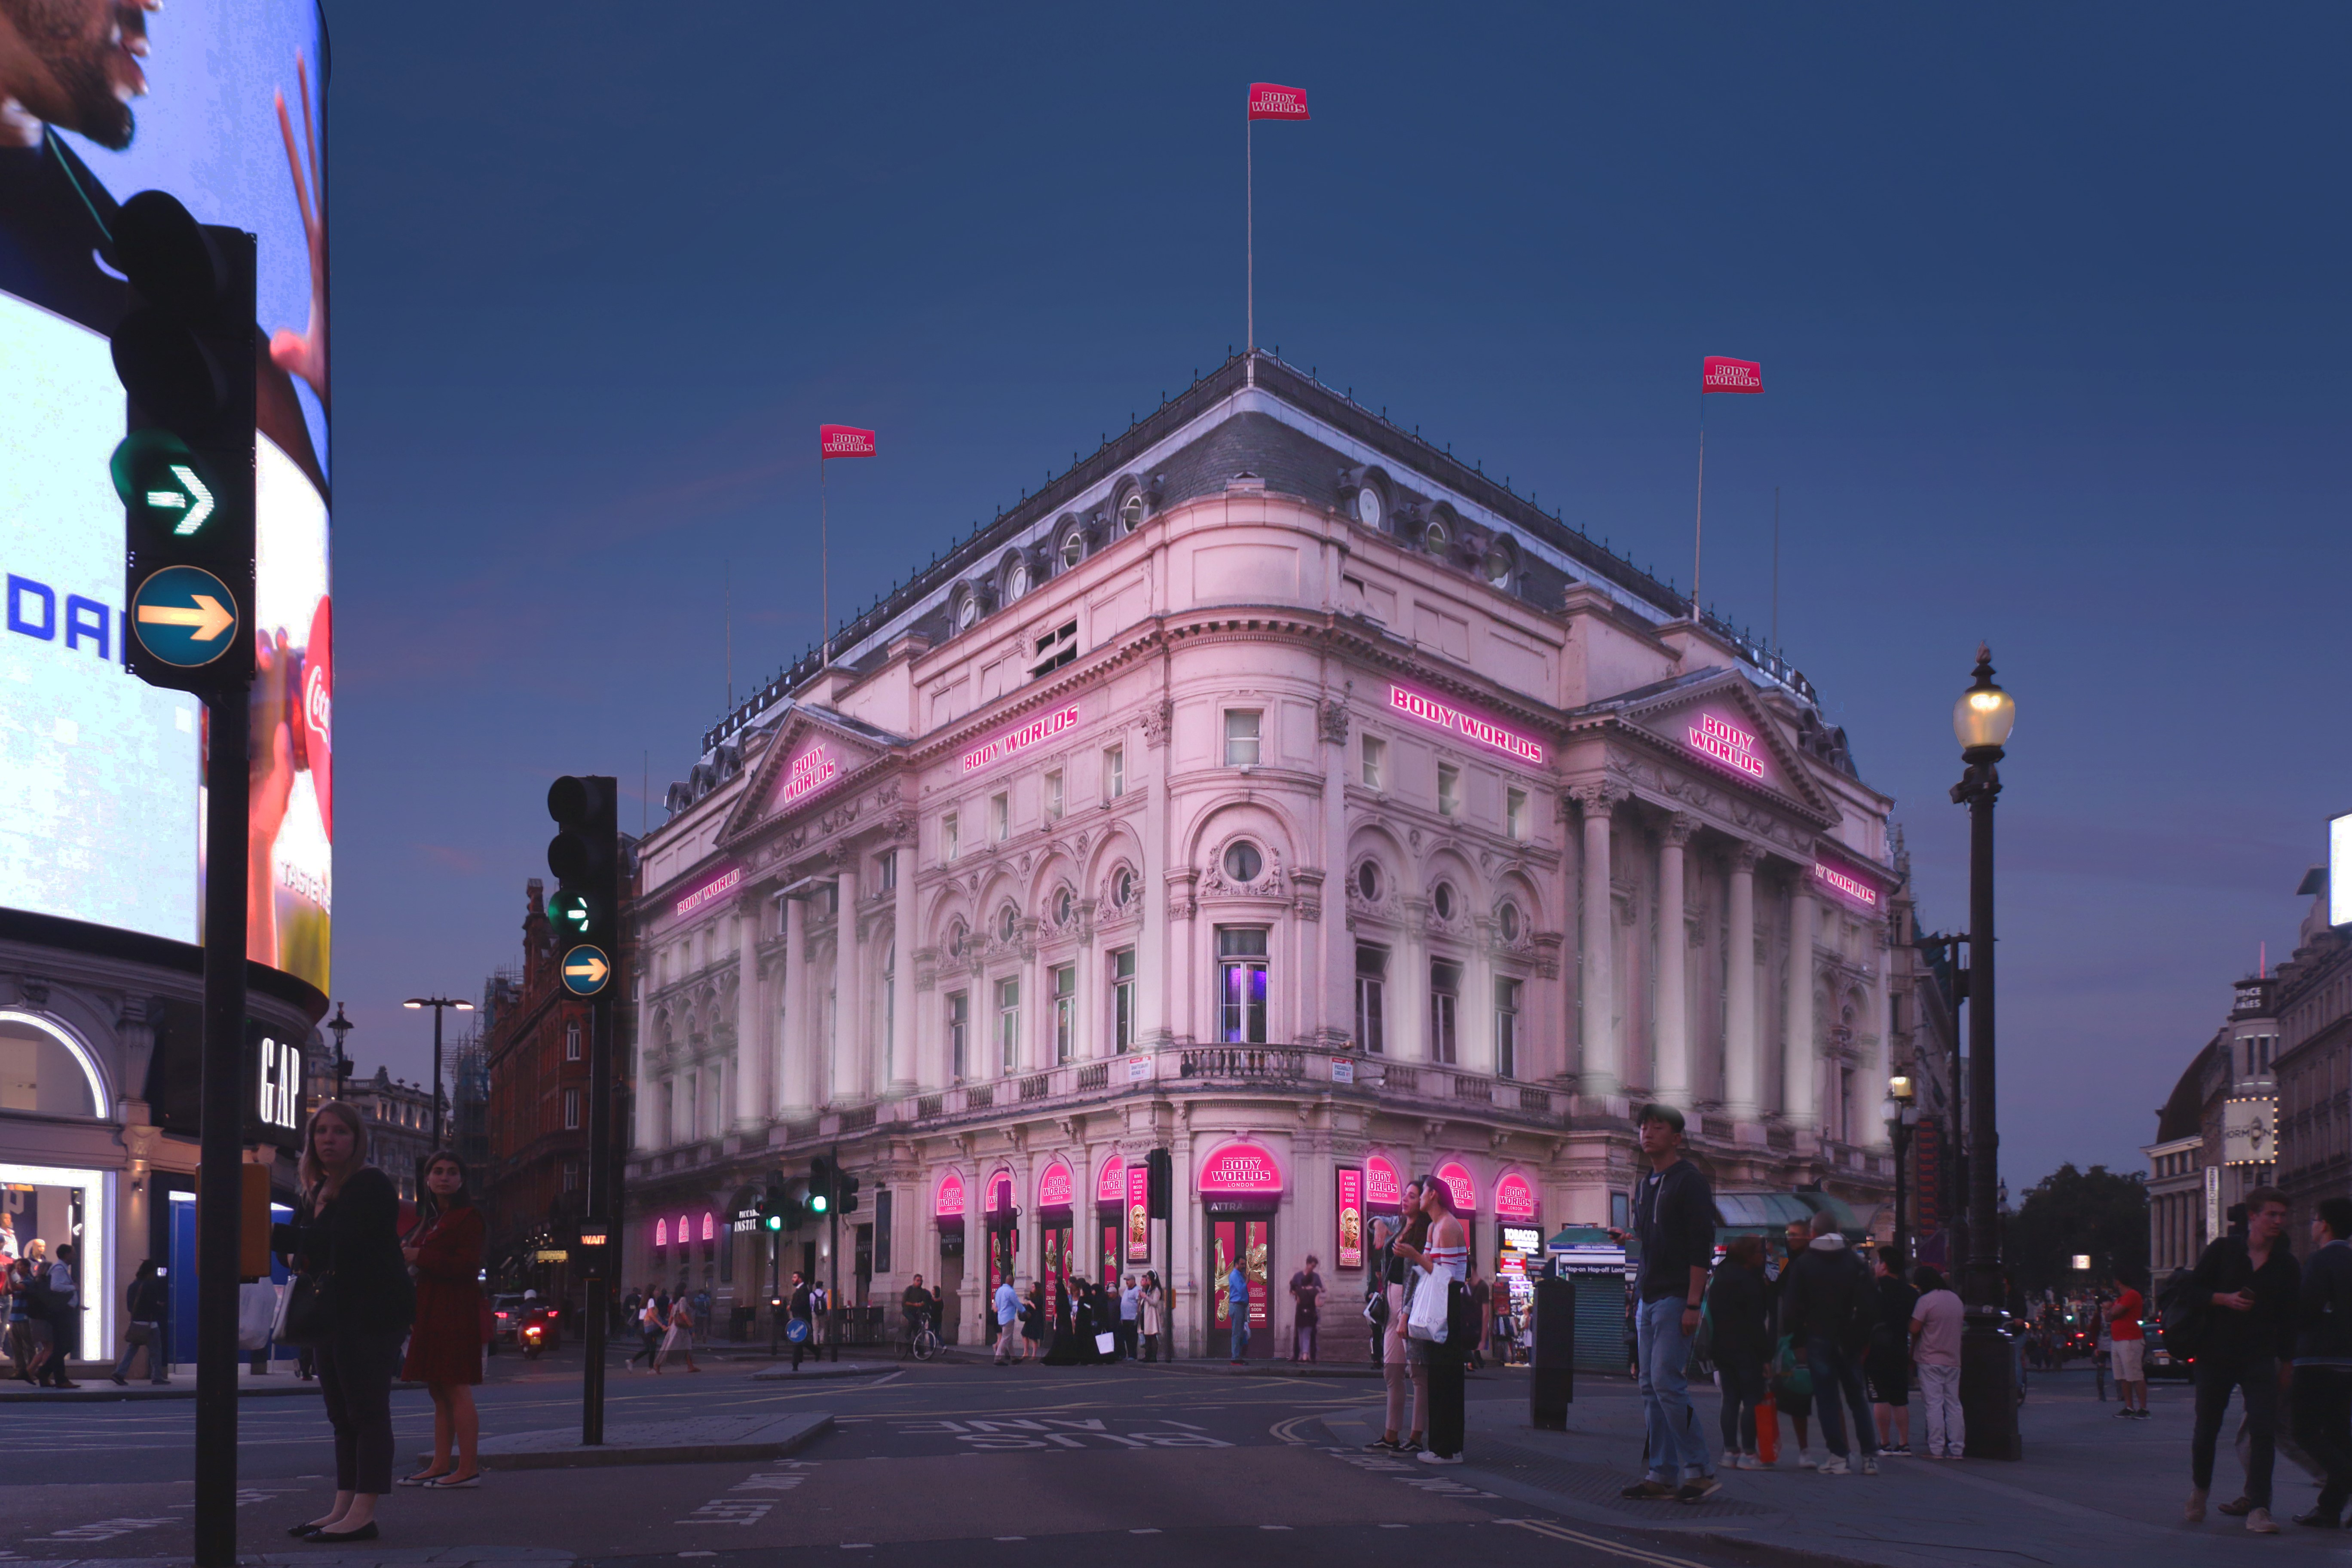 The London Pavilion in Piccadilly Circus